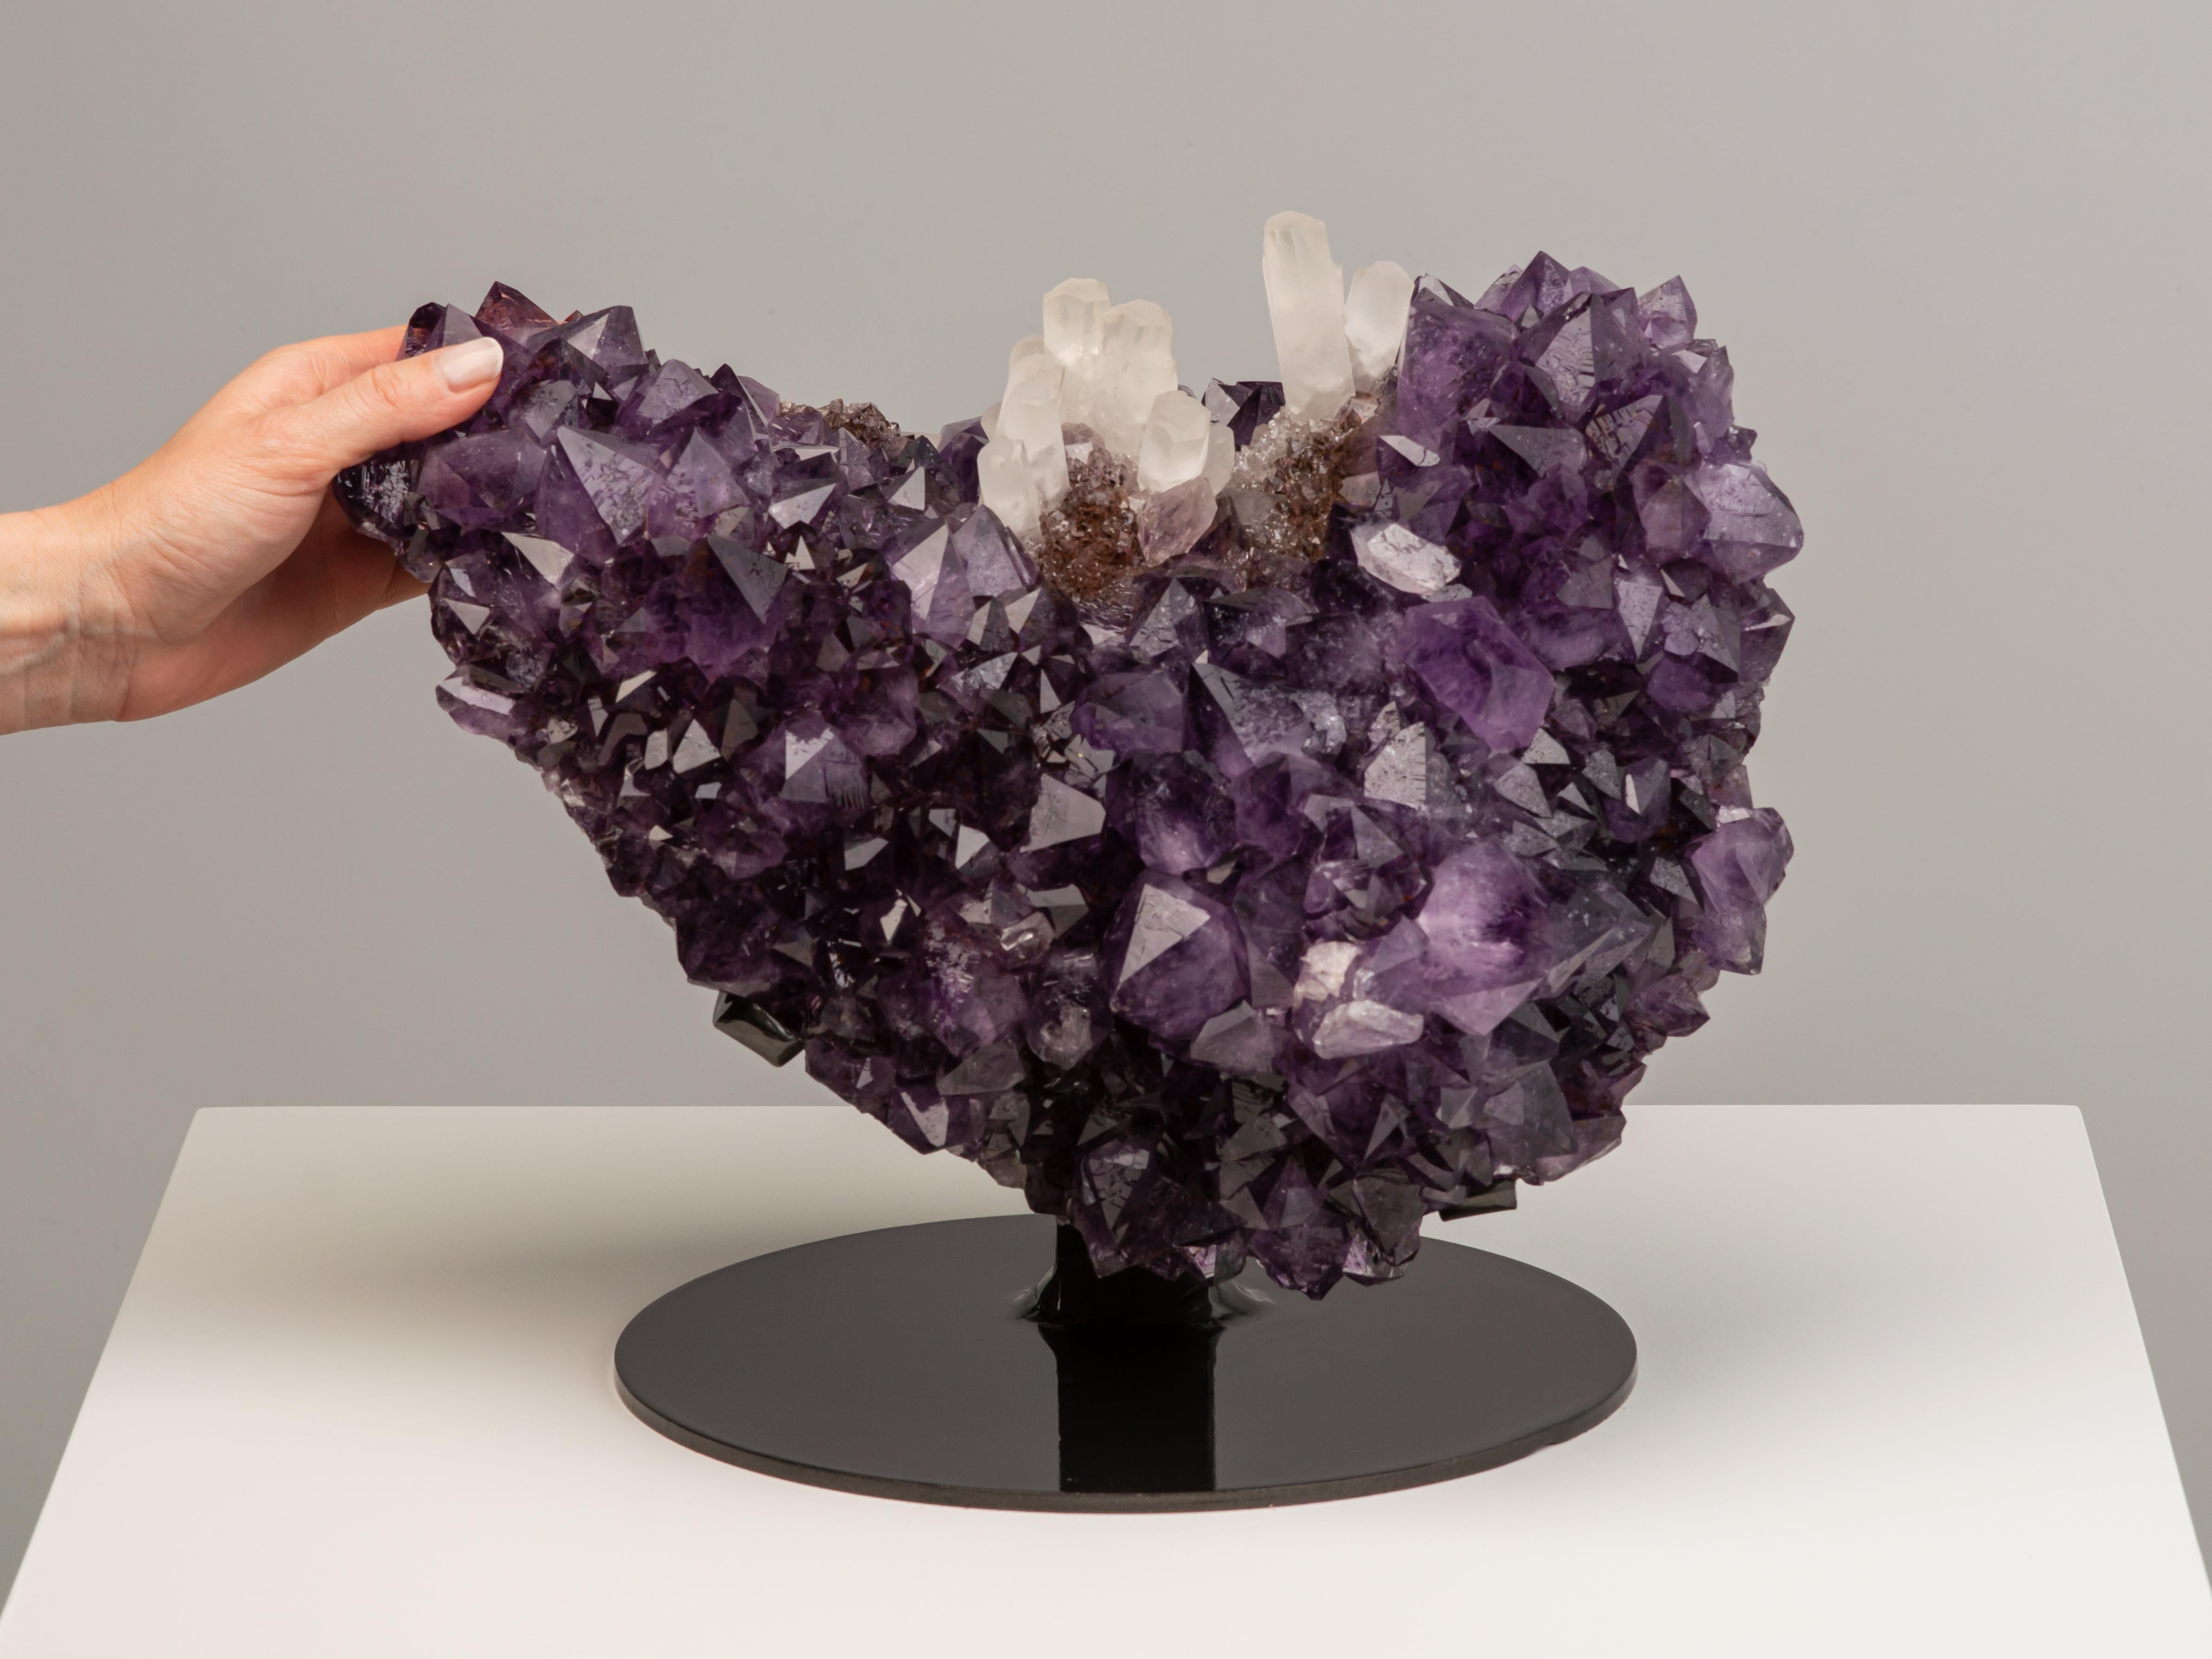 A spectacular amethyst cluster with two sets of unusual finger-like calcite
crystals on a bed of druzy quartz. The formation is a pleasing dark purple
colour with large peaks and is particularly notable for the gorgeous and
rare ametrine amethyst